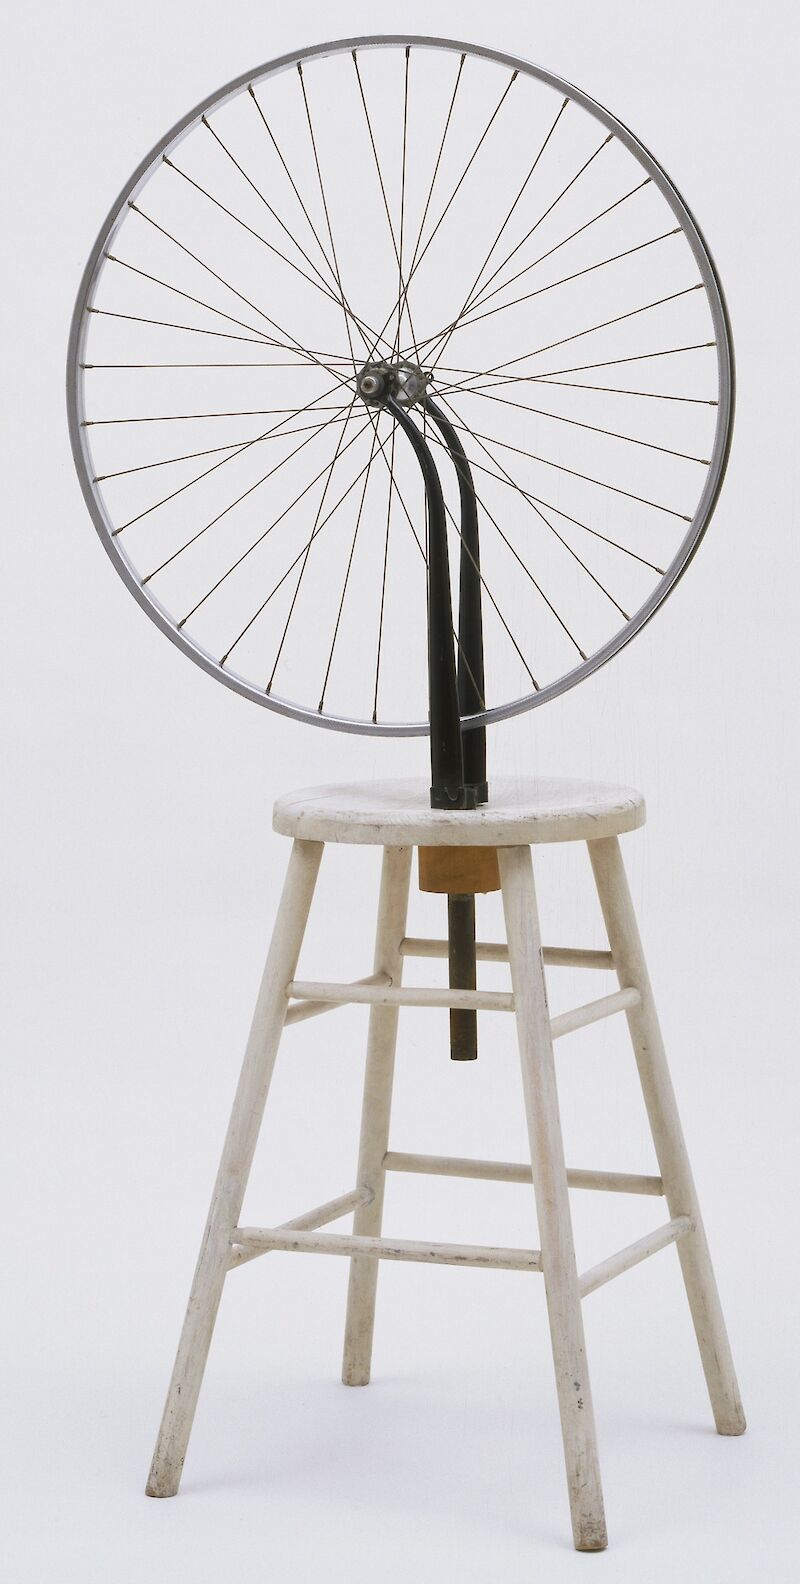 Bicycle Wheel scale comparison